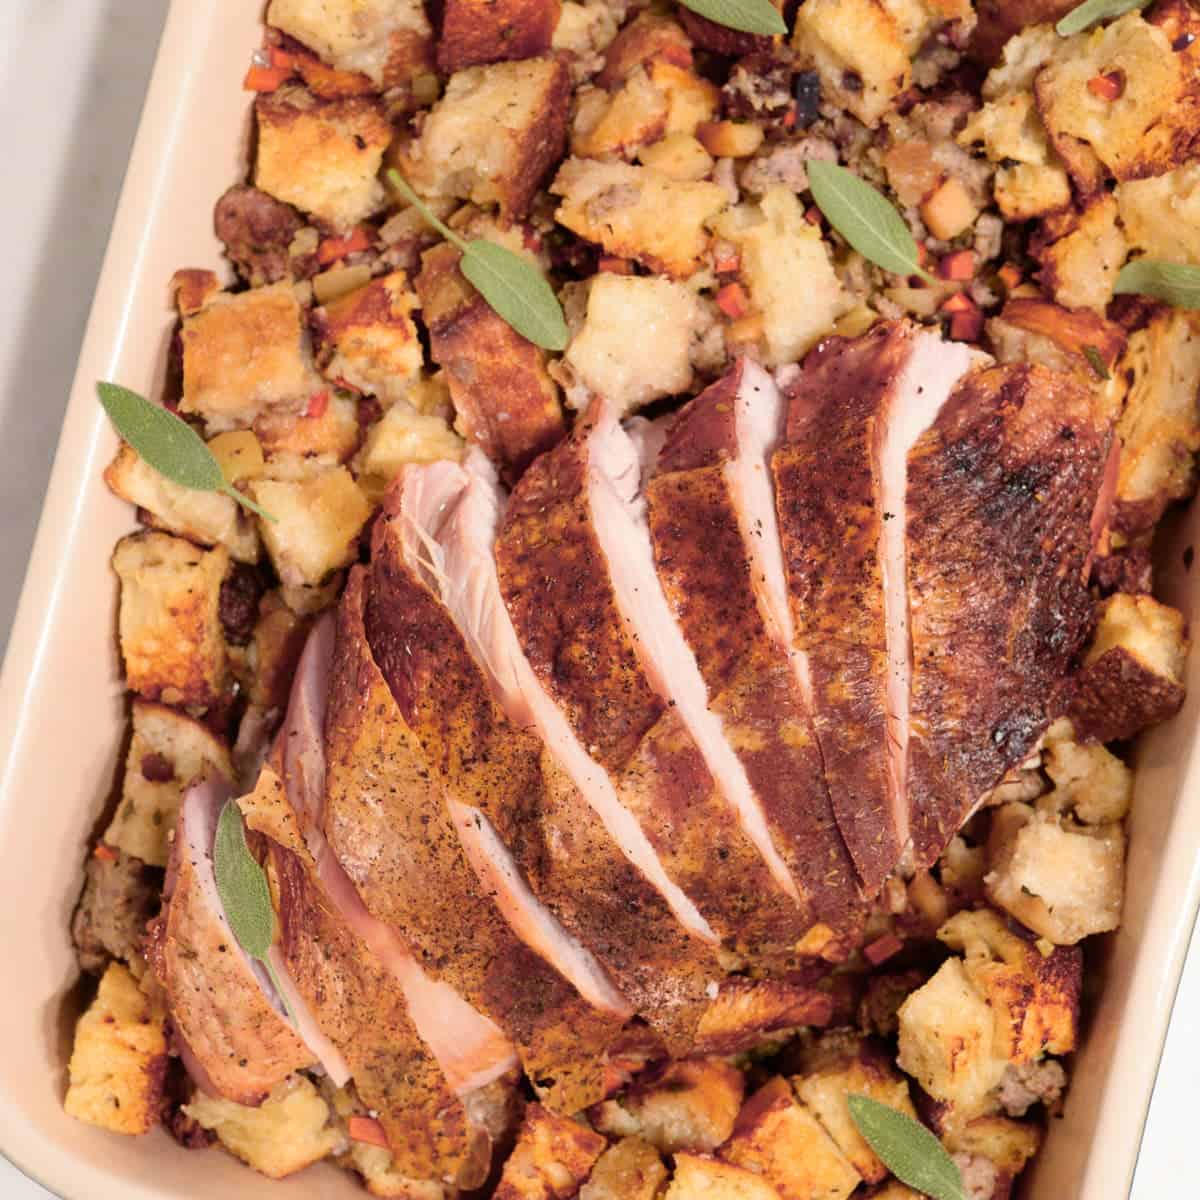 Oven Roasted Turkey Breast with Sausage and Apple Stuffing